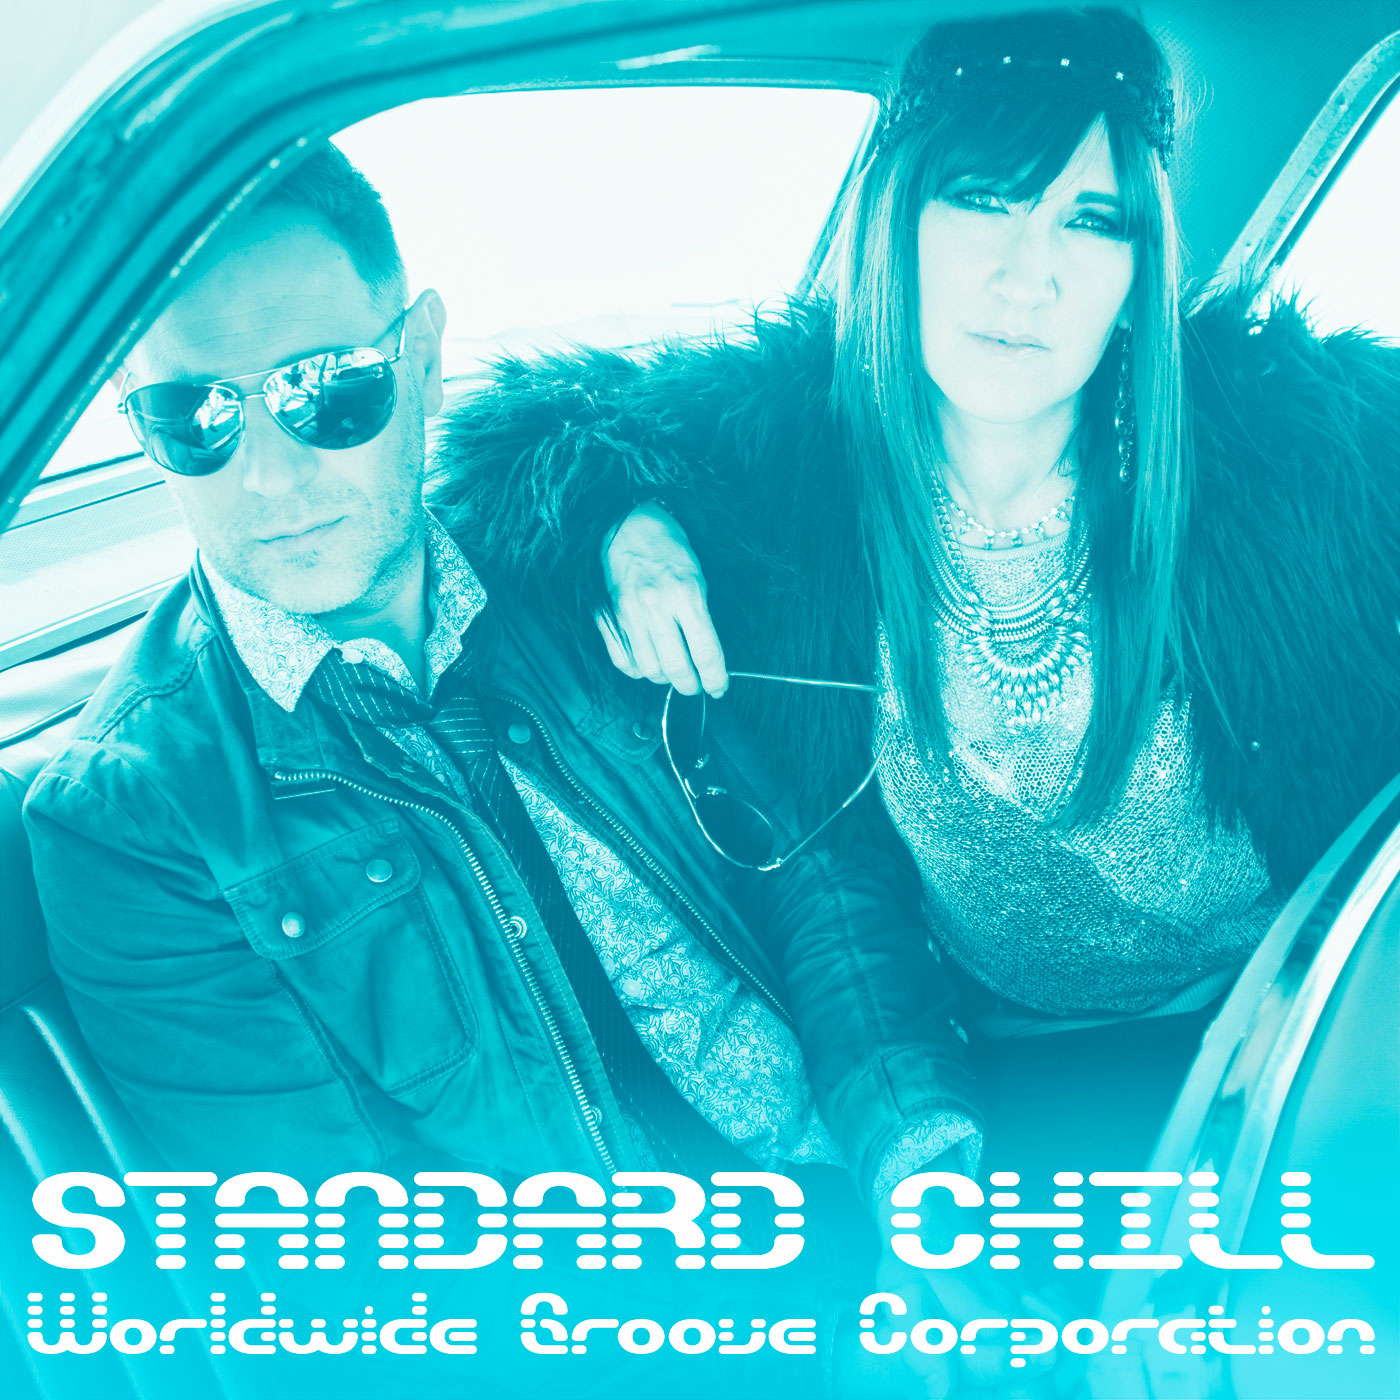 "Standard Chill" by Worldwide Groove Corporation